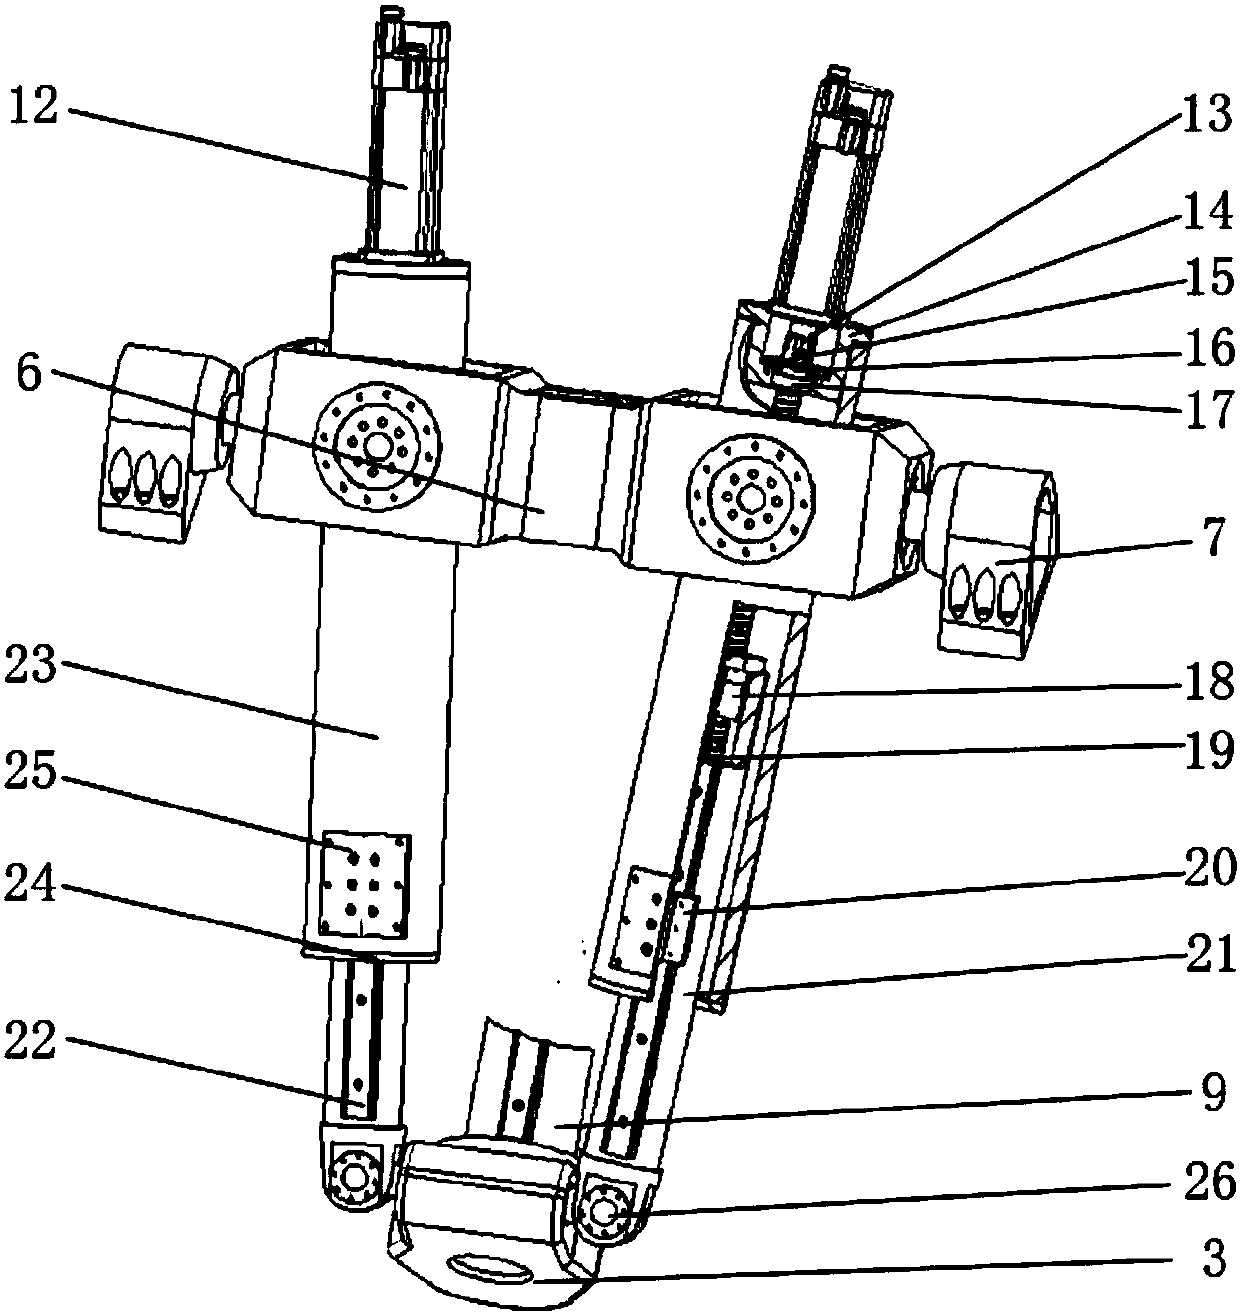 Few-joint over-constrained five-freedom-degree parallel serial robot